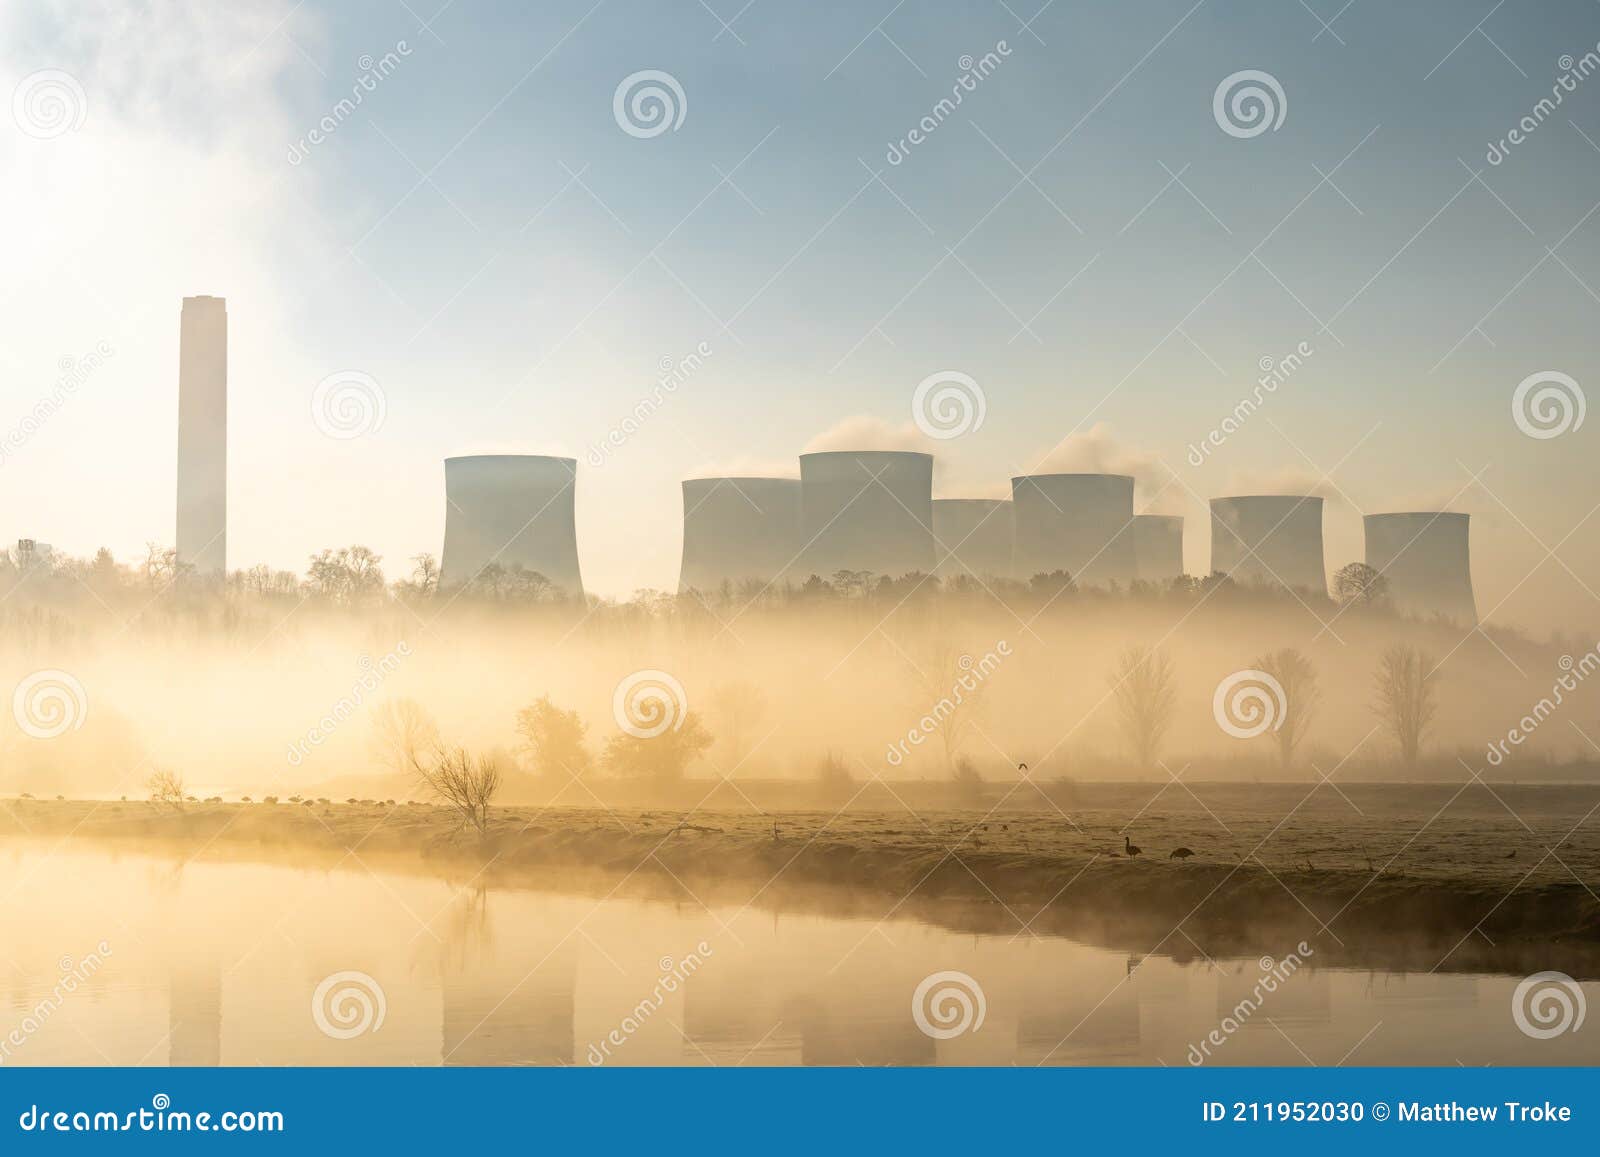 coal fired electric power station with chimneys and cooling towers surrounded by fog and mist at sunrise next to river haze